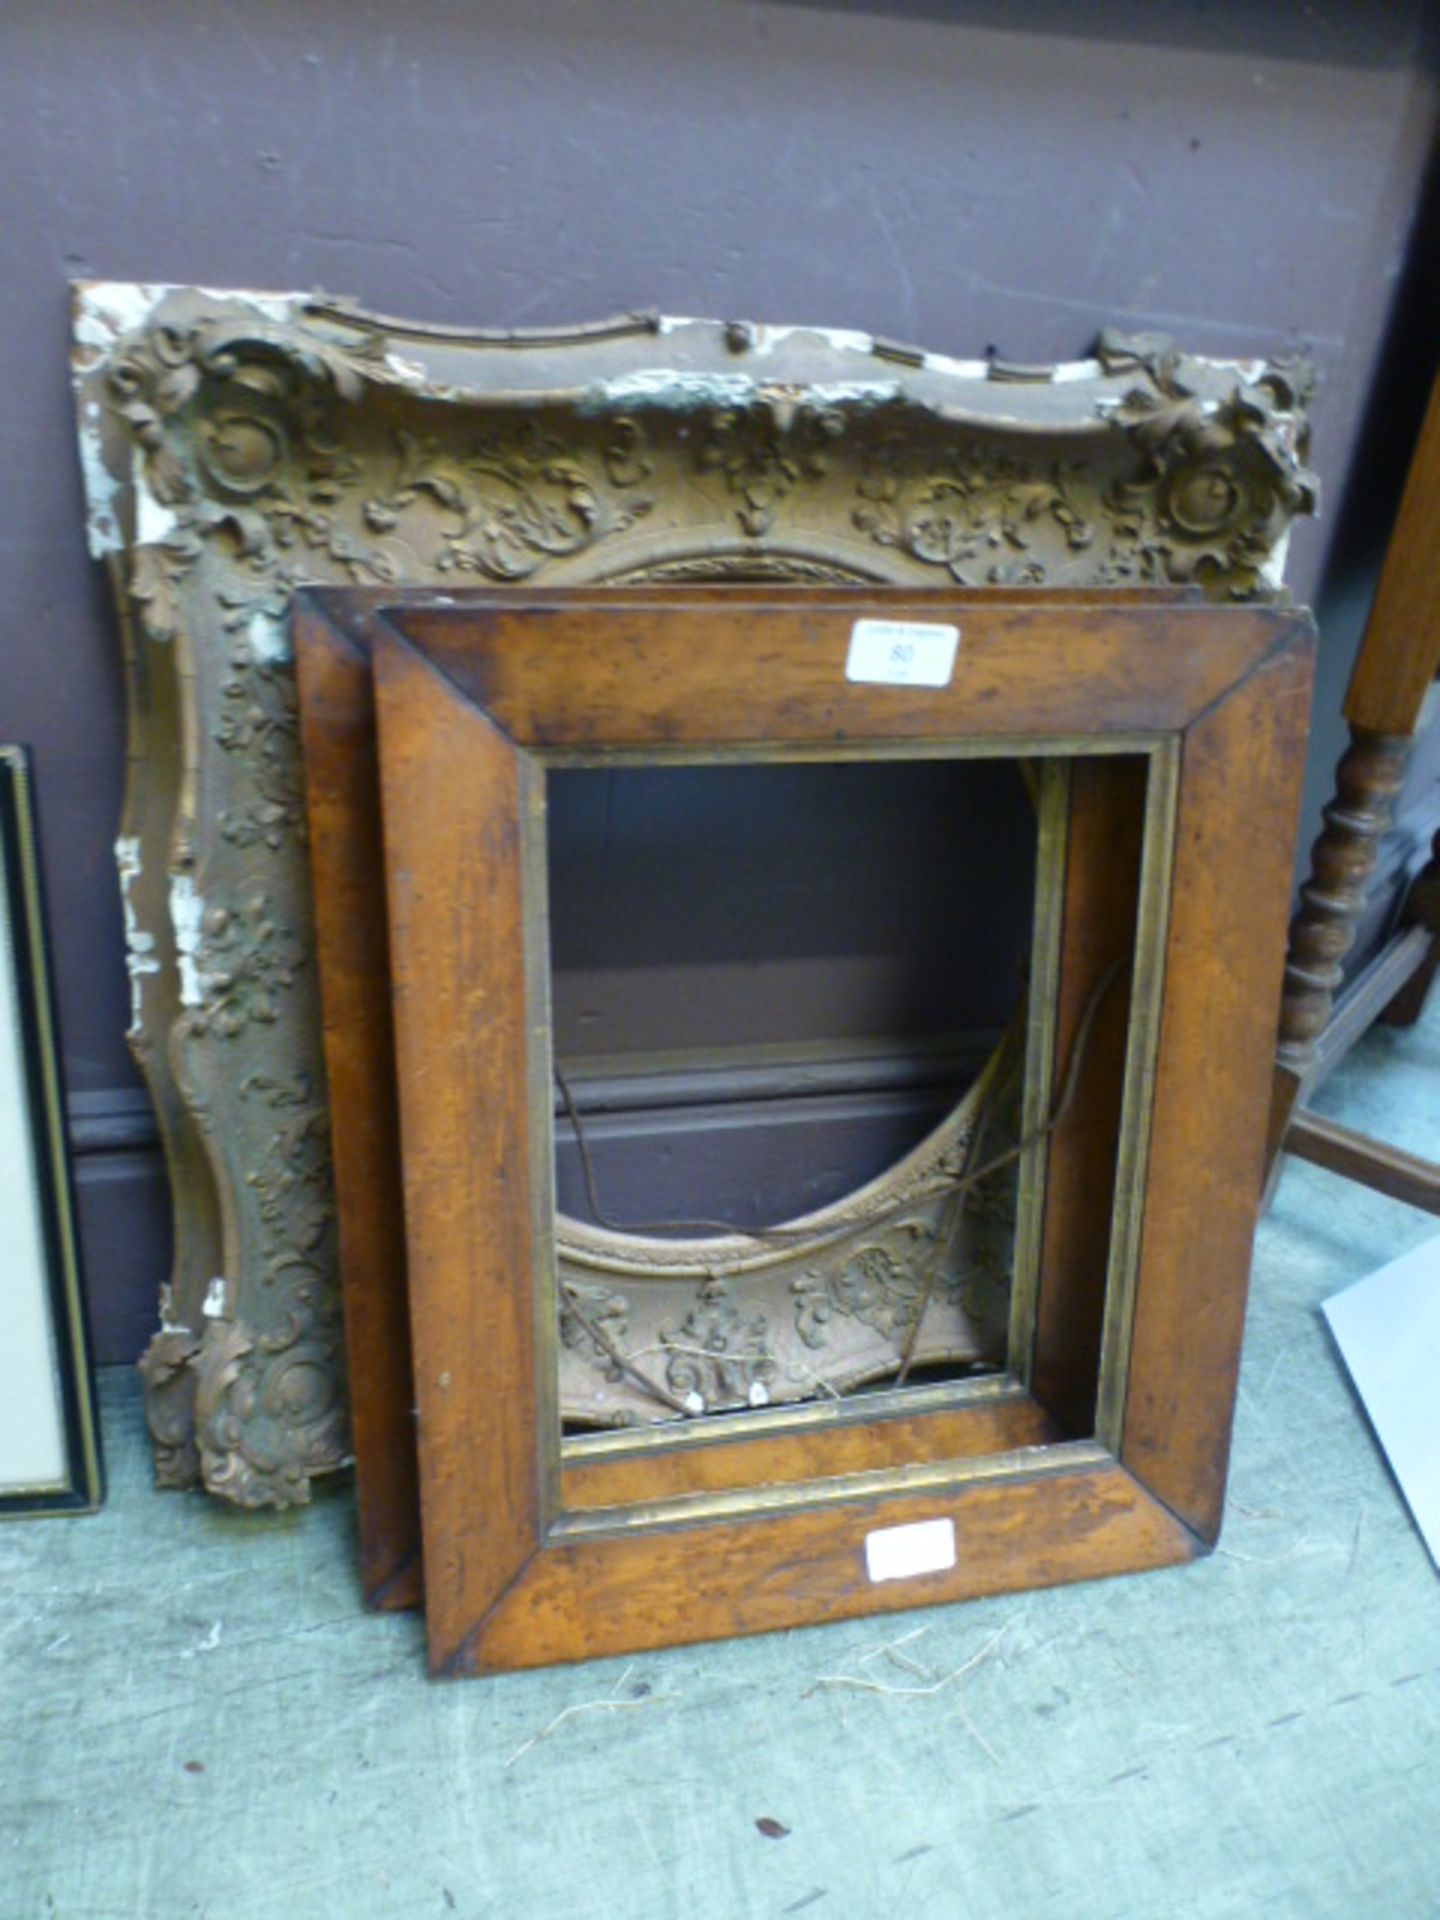 A pair of bird eye maple veneered picture frames together with an ornate gilt frame